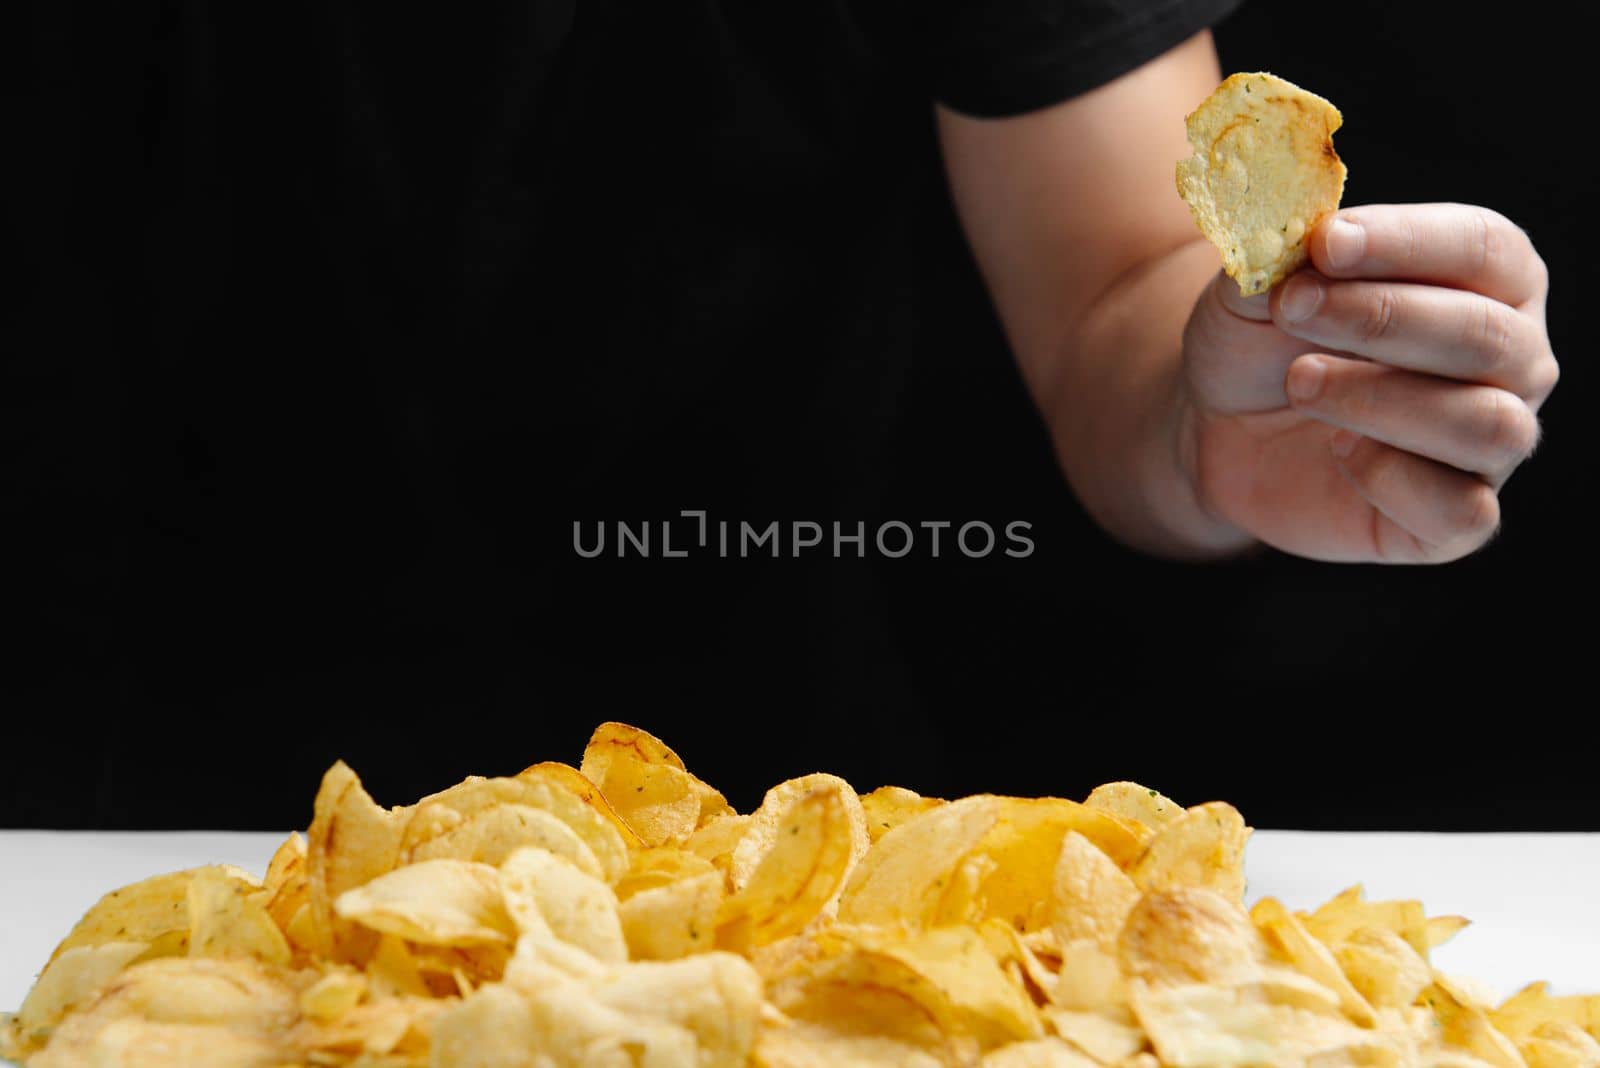 The man is eating junk food, chips on a dark background. Harmful food. Fried food is bad for your health. Healthy lifestyle, proper nutrition, ban on unhealthy foods. The ban on chips. Stop banned foods. by gulyaevstudio